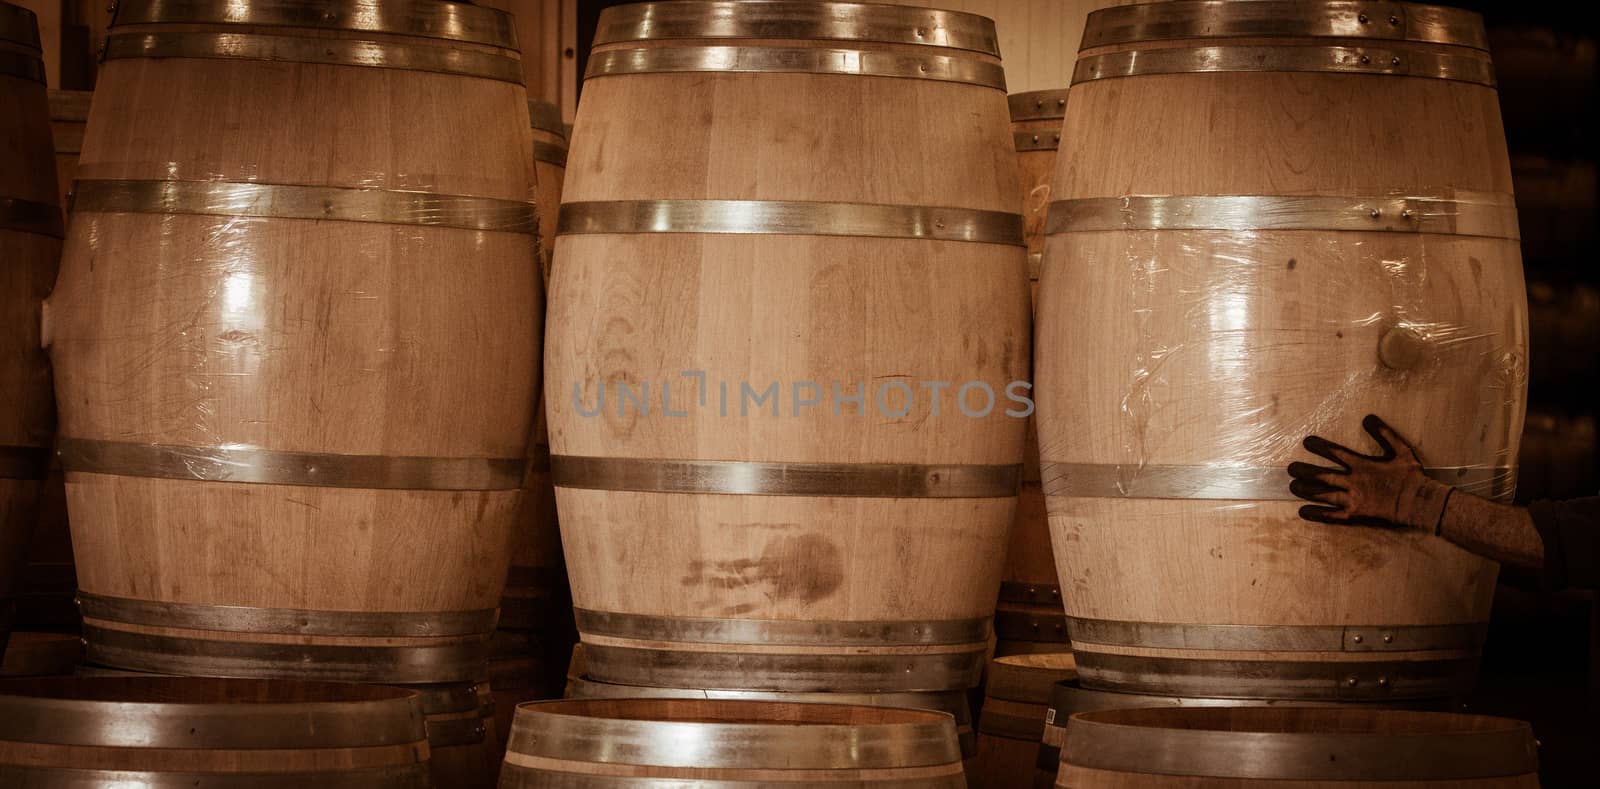 Winemaker barrels moving up or down by rolling on the ground in a large storage cellar, Bordeaux Vineyard, France